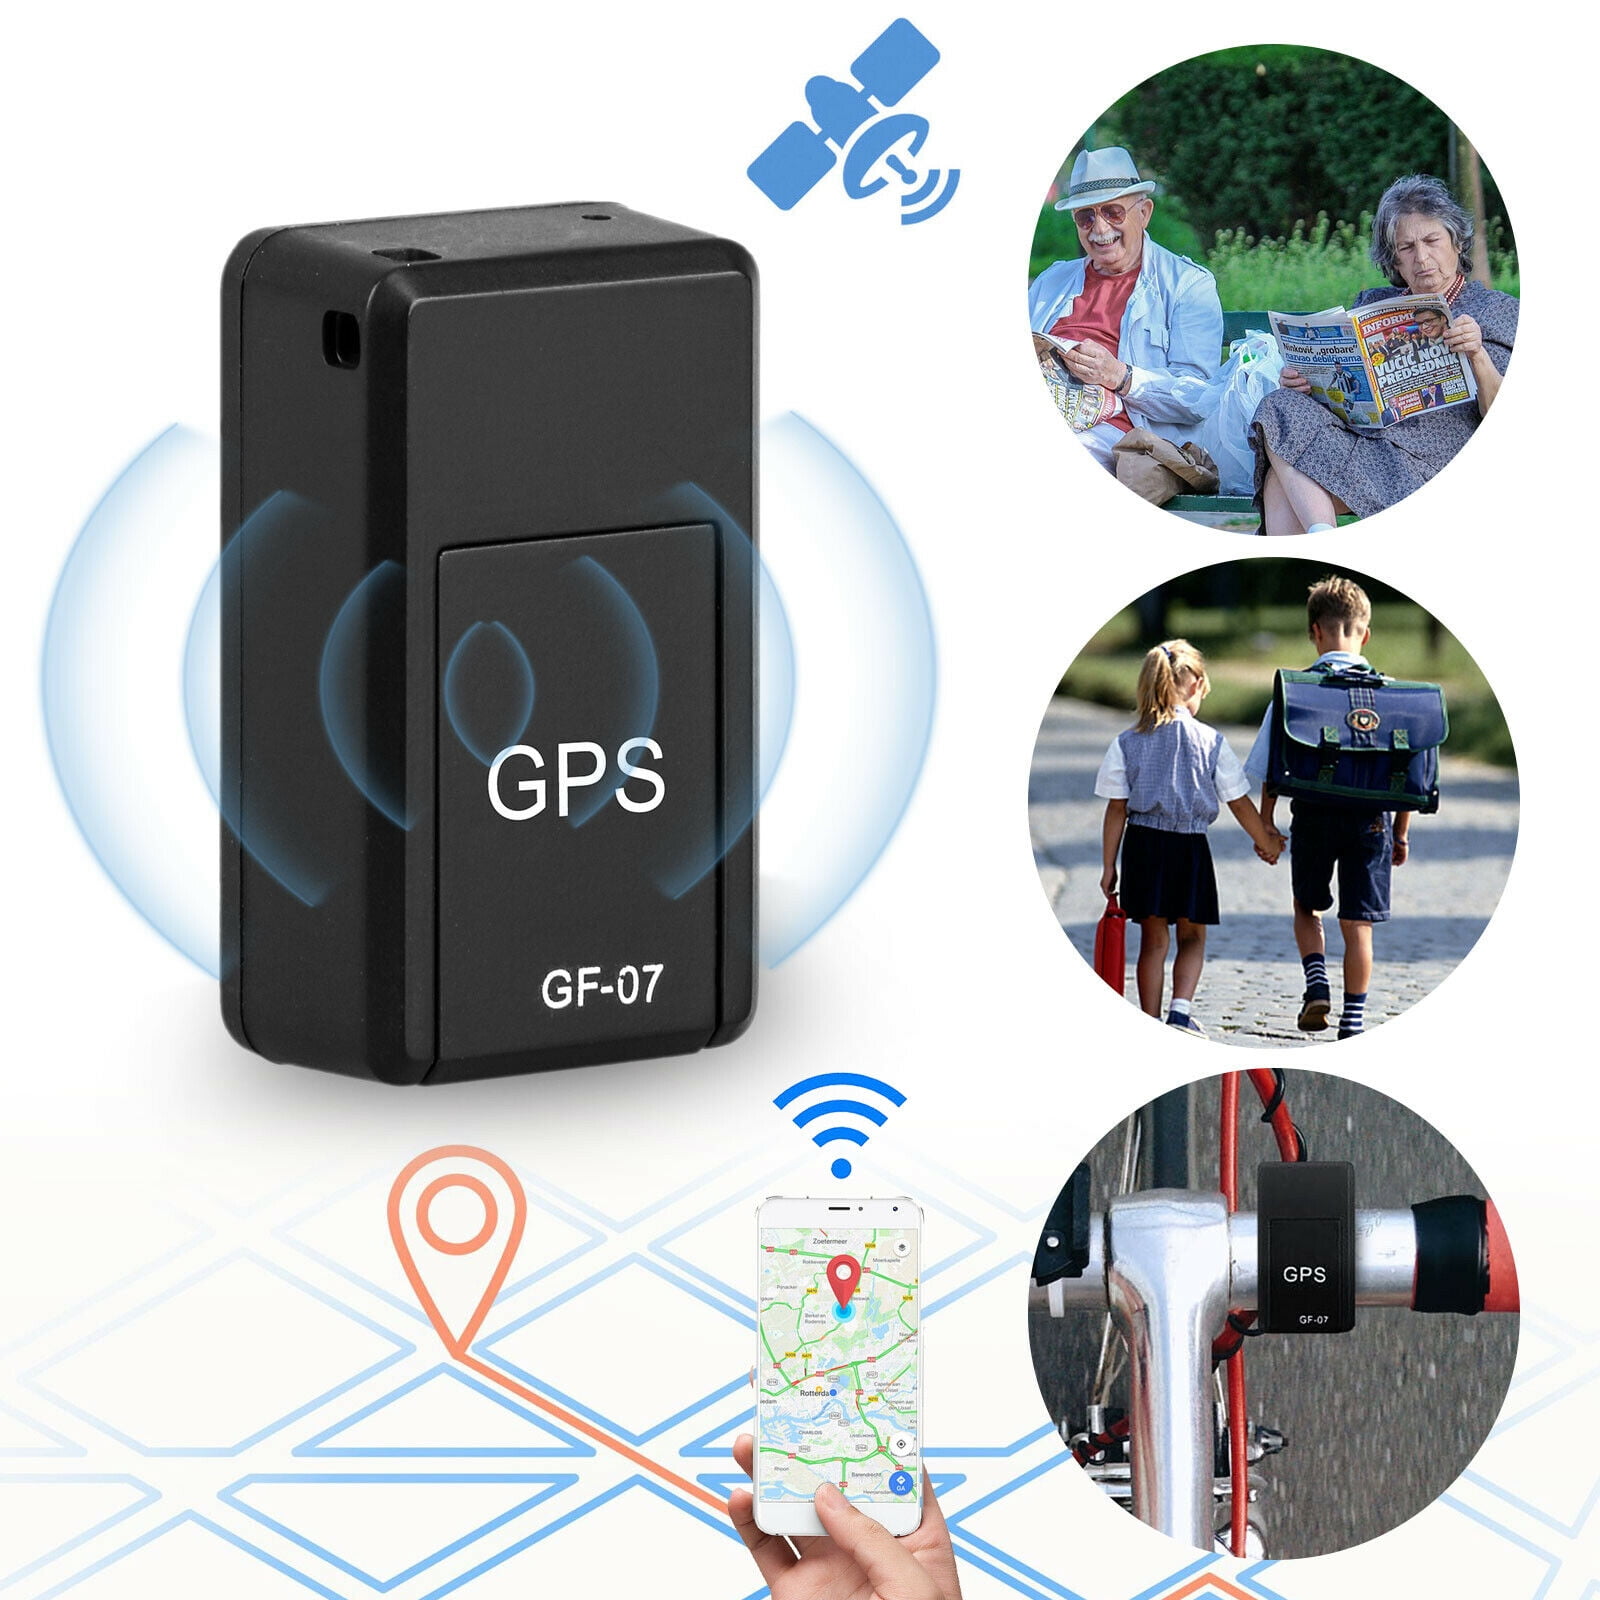 LoneStar Tracking Oyster3 5G GPS Tracker for Assets- Car GPS Tracker- Up to  7 Year Battery Life - Small GPS Tracker, Waterproof GPS for Asset Tracking,  Vehicle Tracking Device (Subscription Required) 